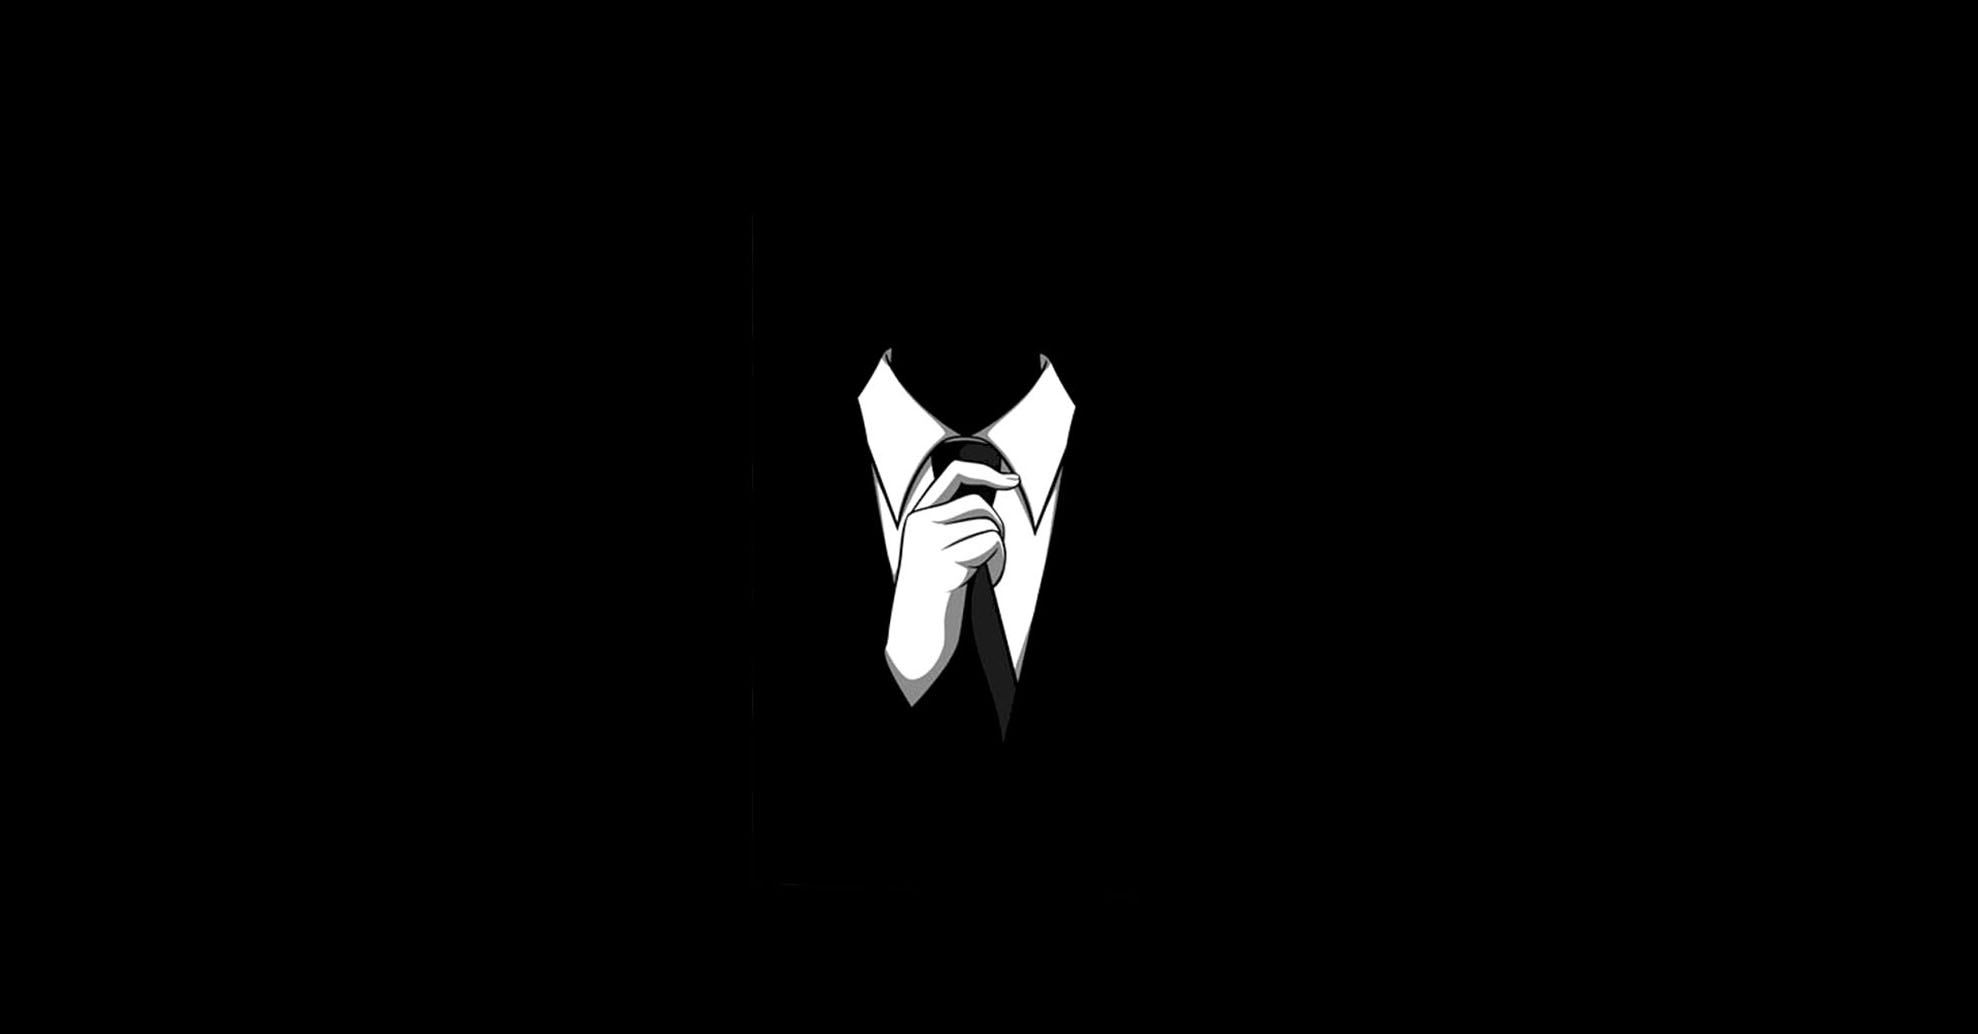 Minimalistic Suit And Tie Wallpaper